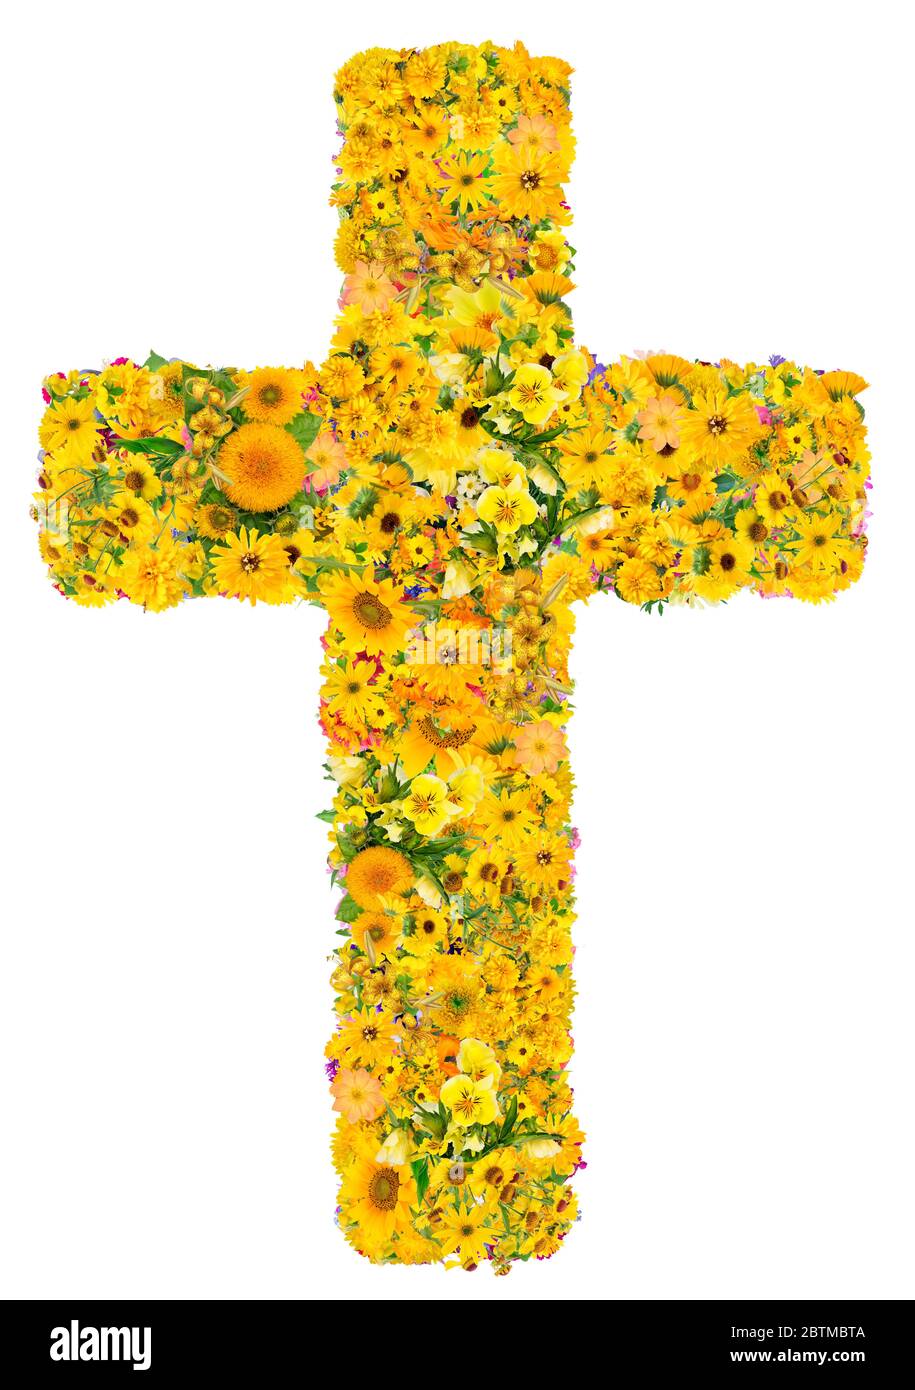 Golden cross of Jesus in my heart  save the world from disease.  Handmade collage from yelloe  summer flowers. Isolated on white Stock Photo